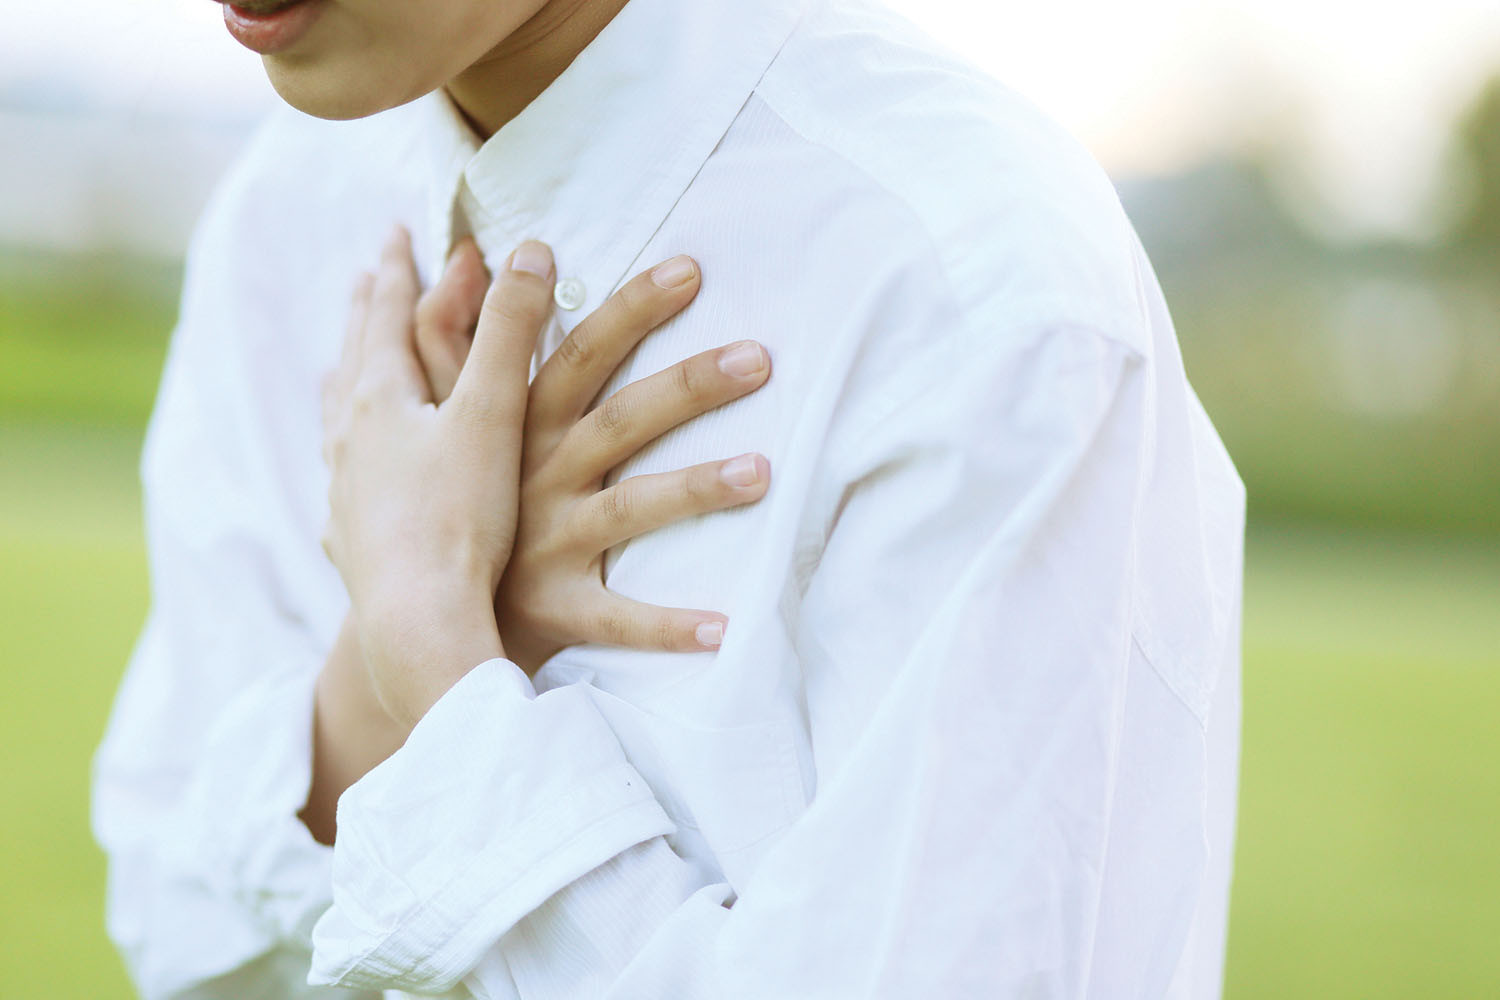 photo of a younger person clutching their chest